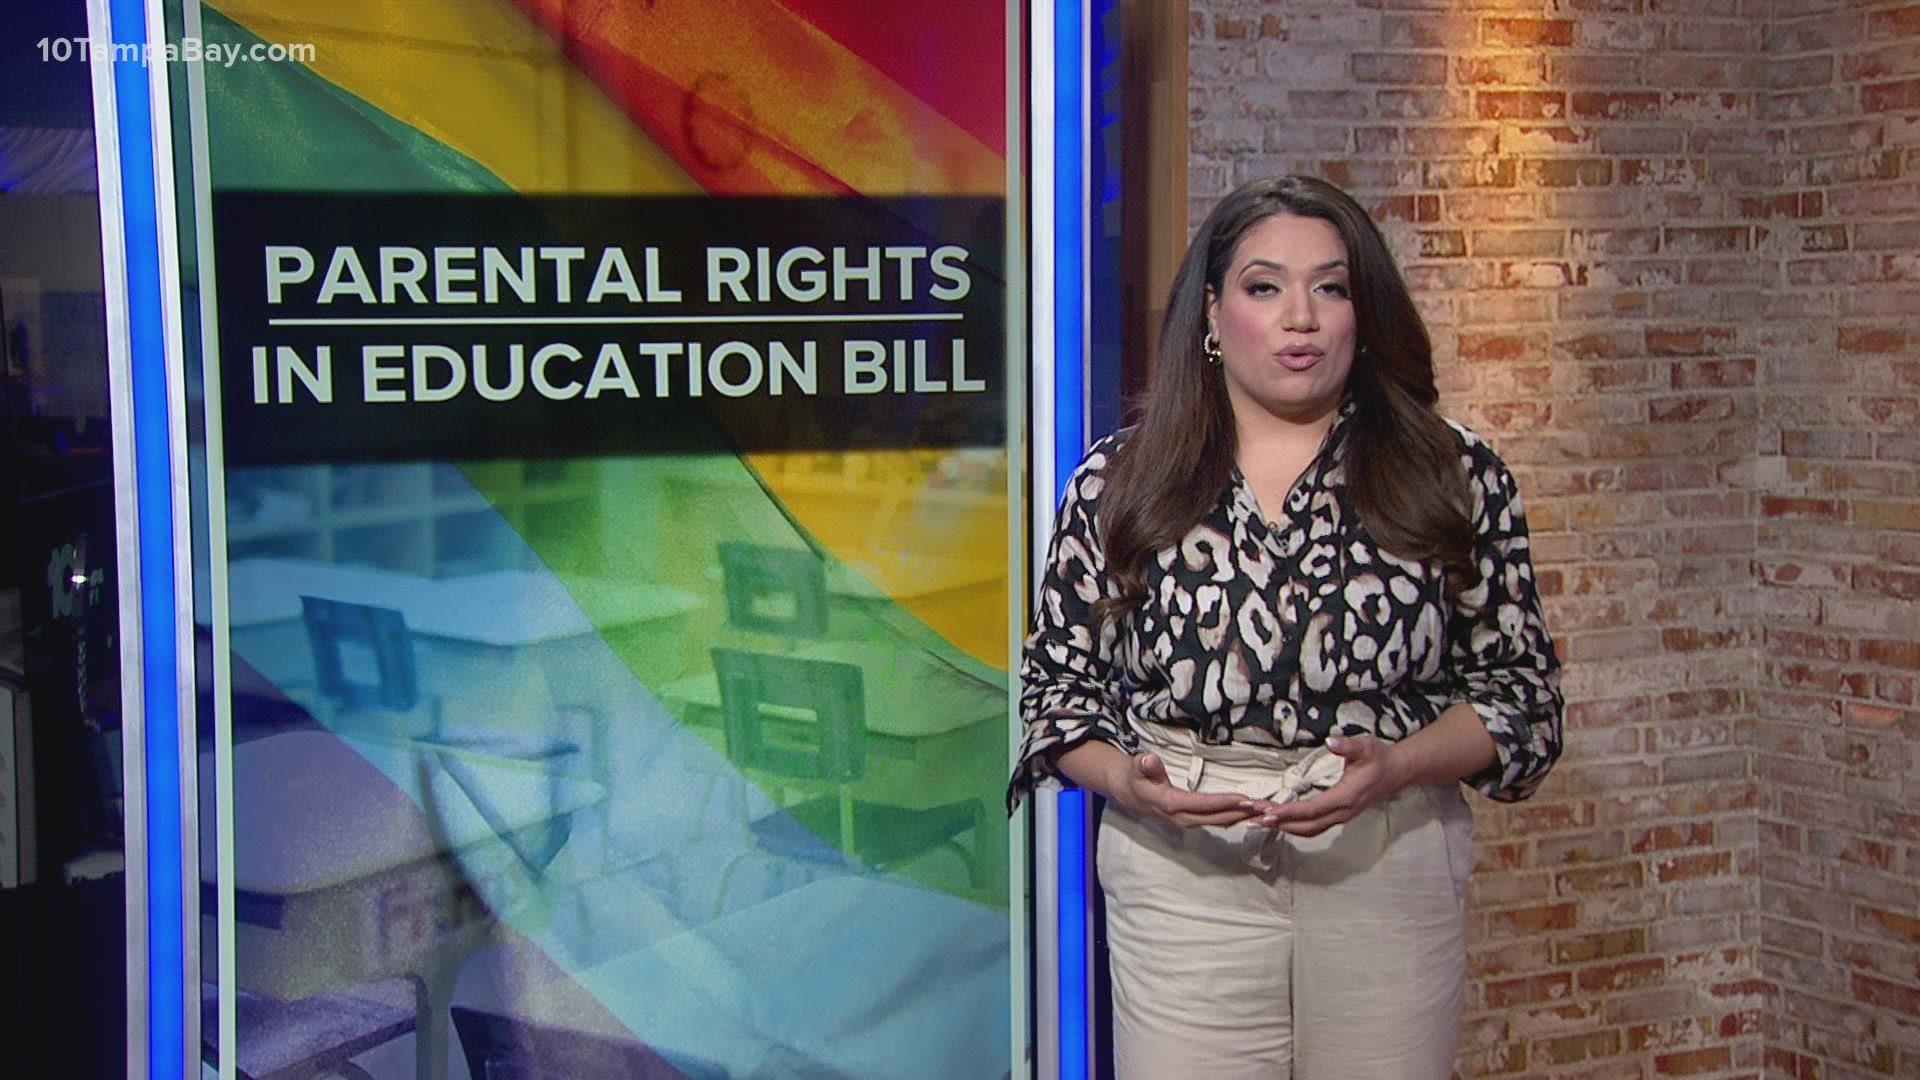 The bill, officially "Parental Rights in Education," is moving through the Florida Legislature. It bars educators from teaching LGBTQ topics to young children.